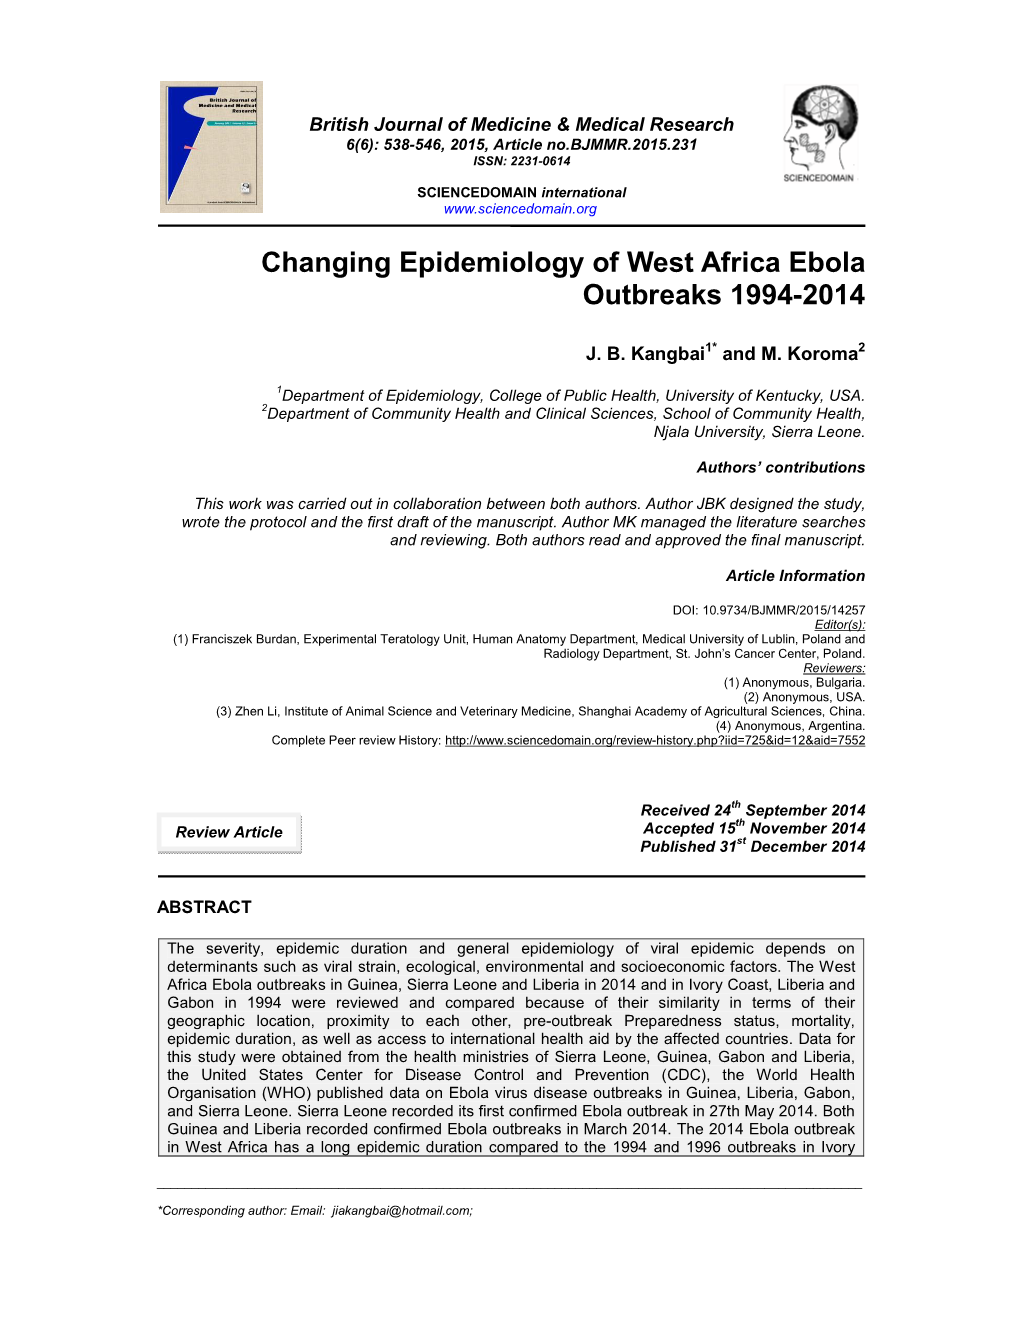 Changing Epidemiology of West Africa Ebola Outbreaks 1994-2014